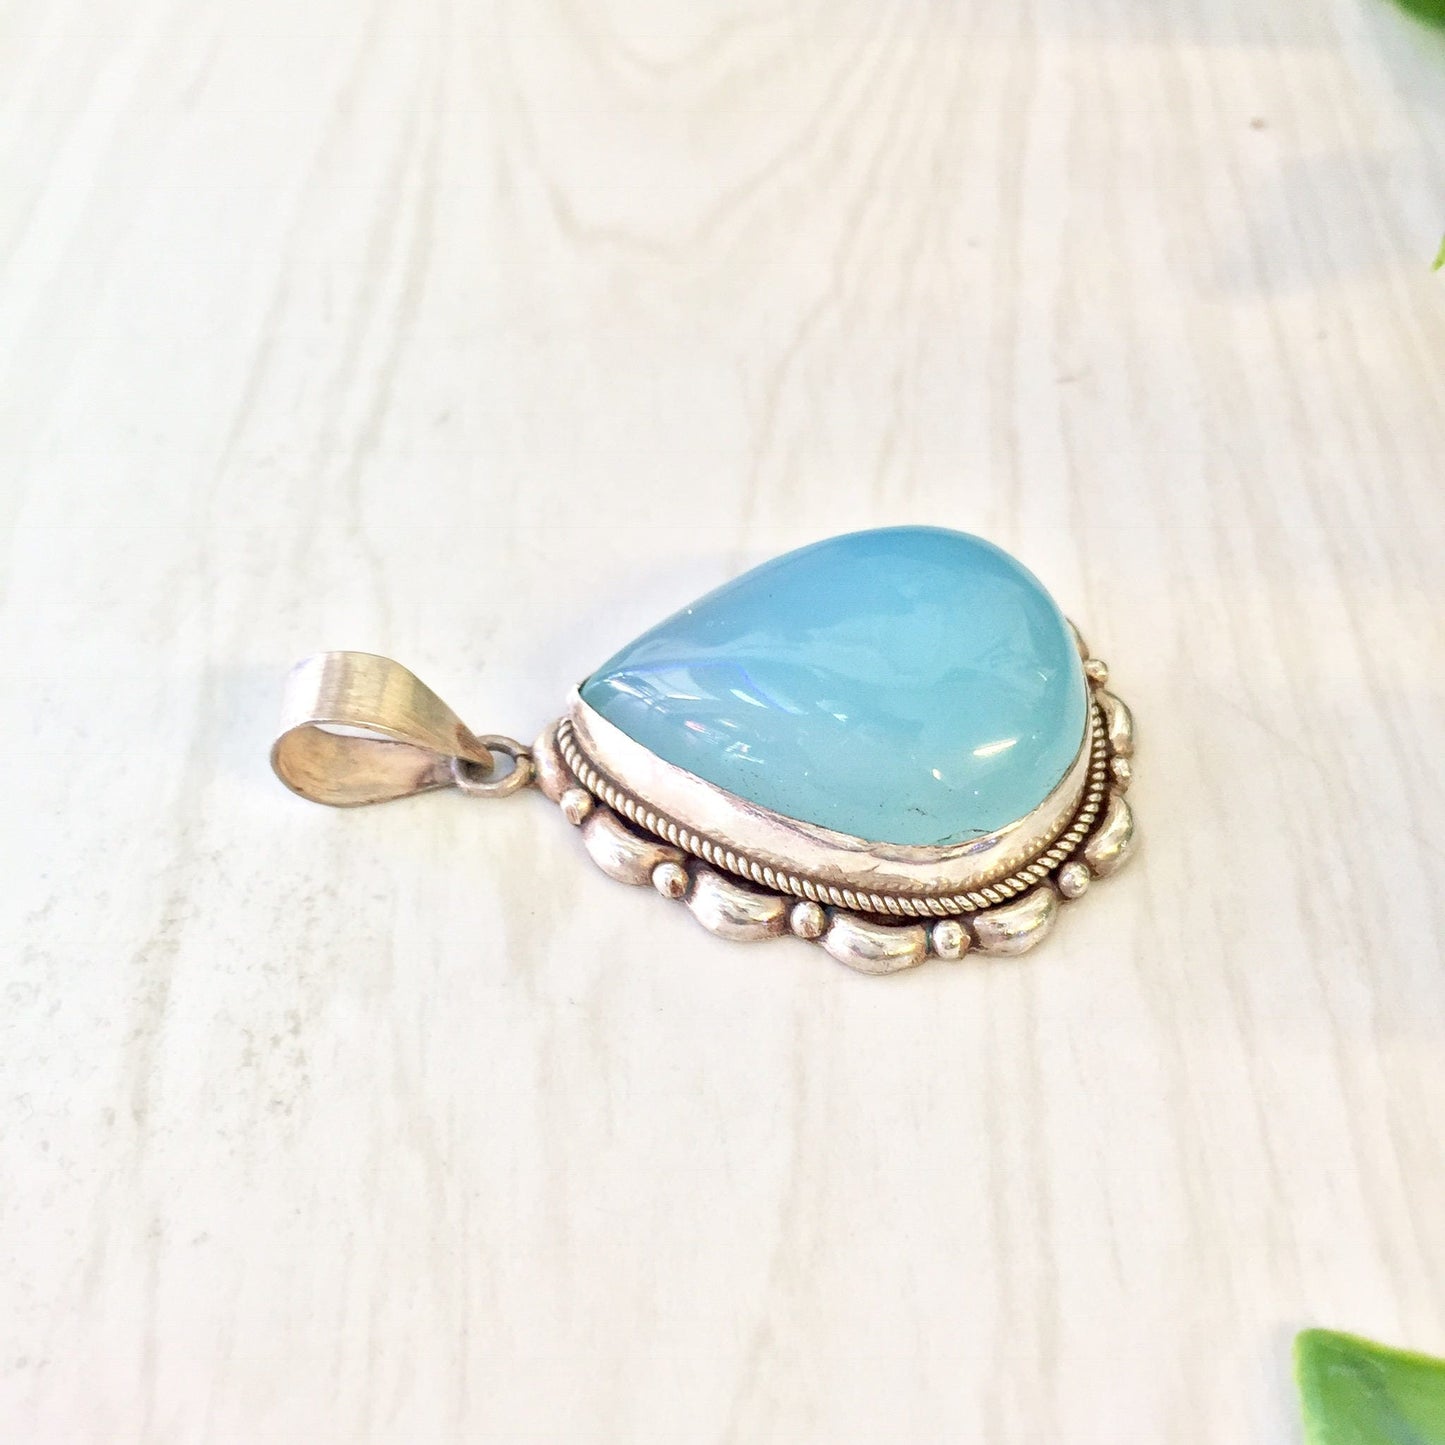 Vintage sterling silver pendant with a blue-green opalite stone, featuring intricate metalwork design.